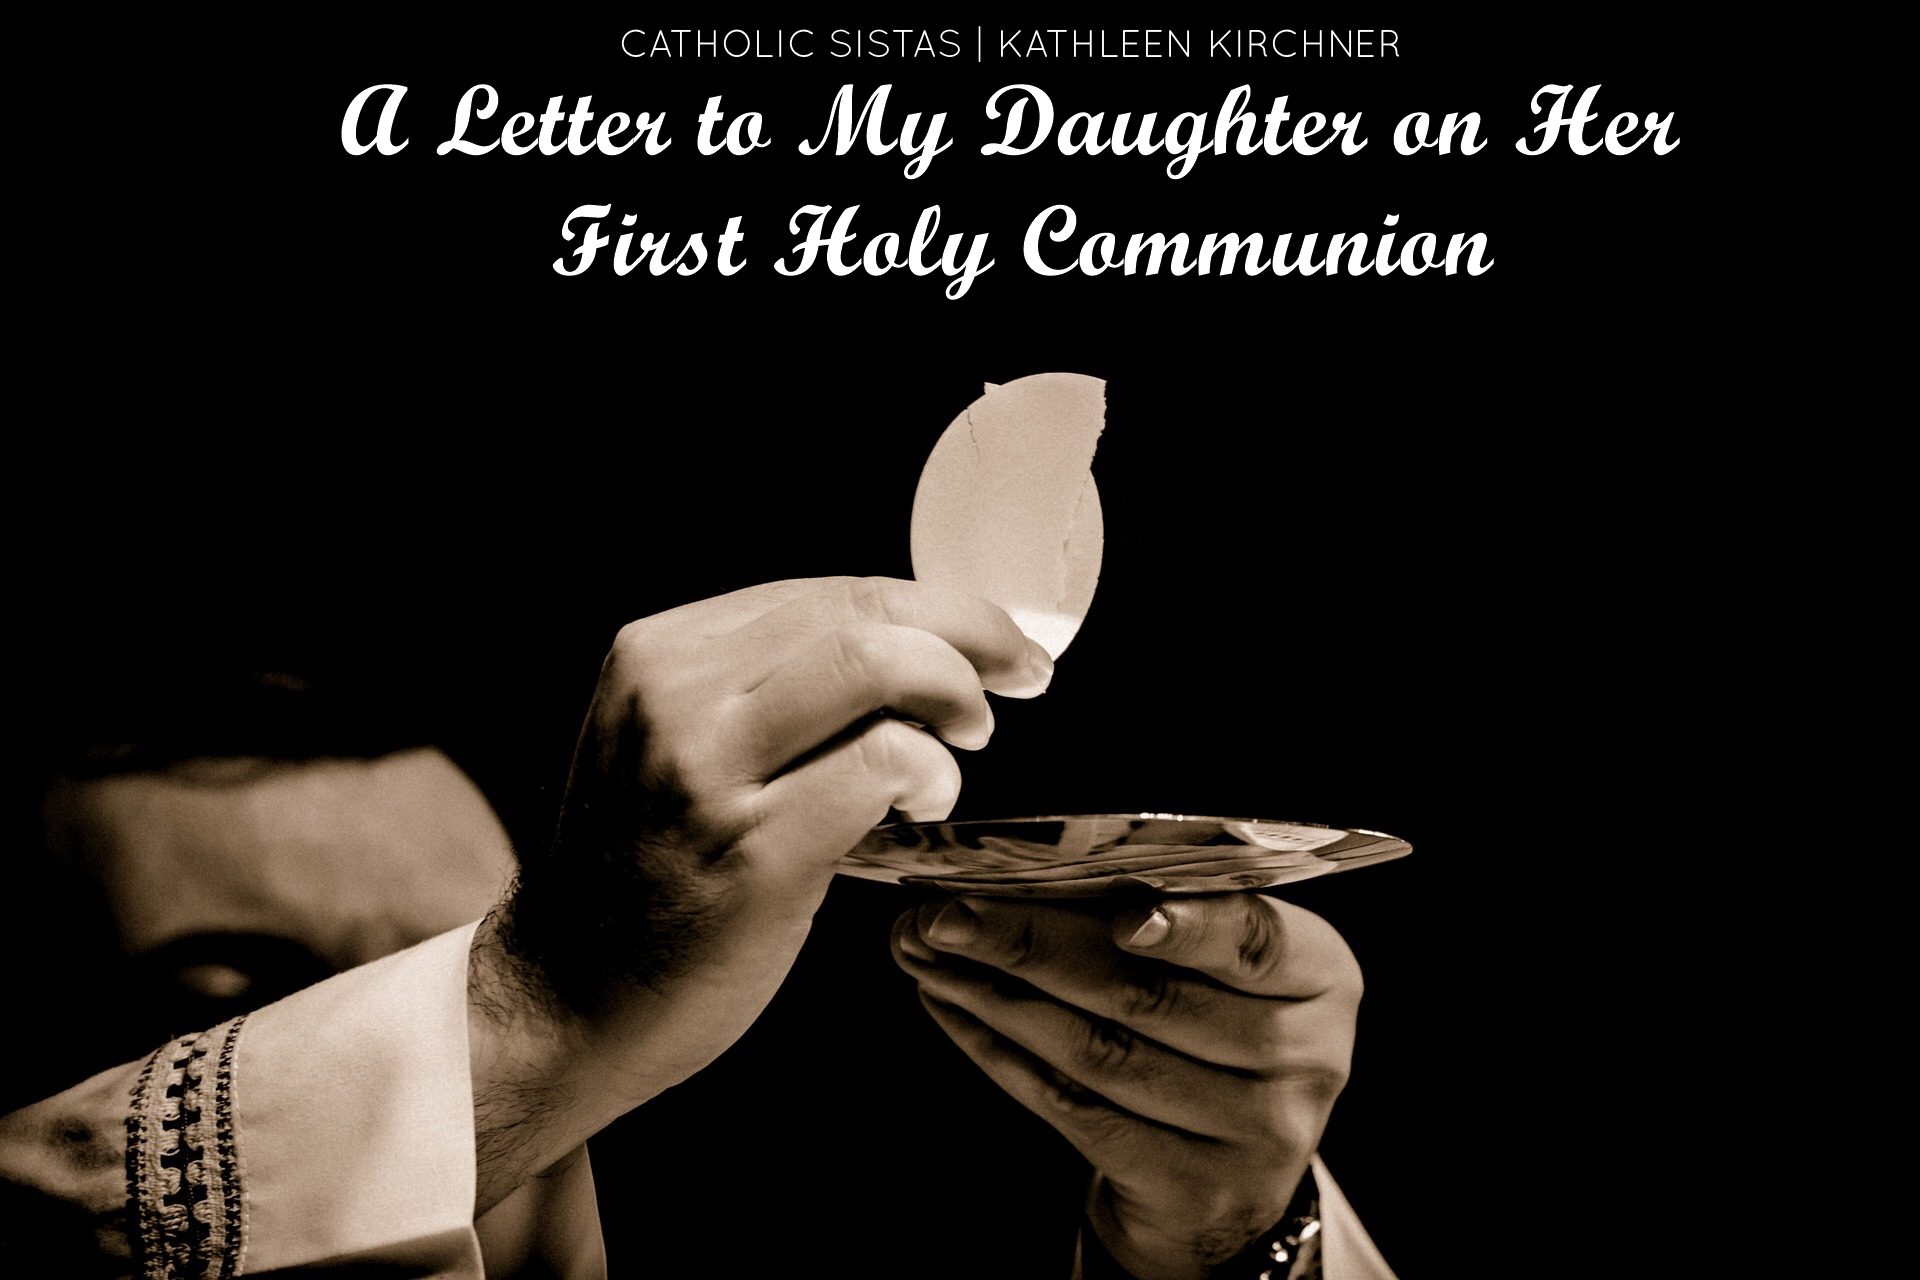 A Letter to My Daughter on Her First Holy Communion